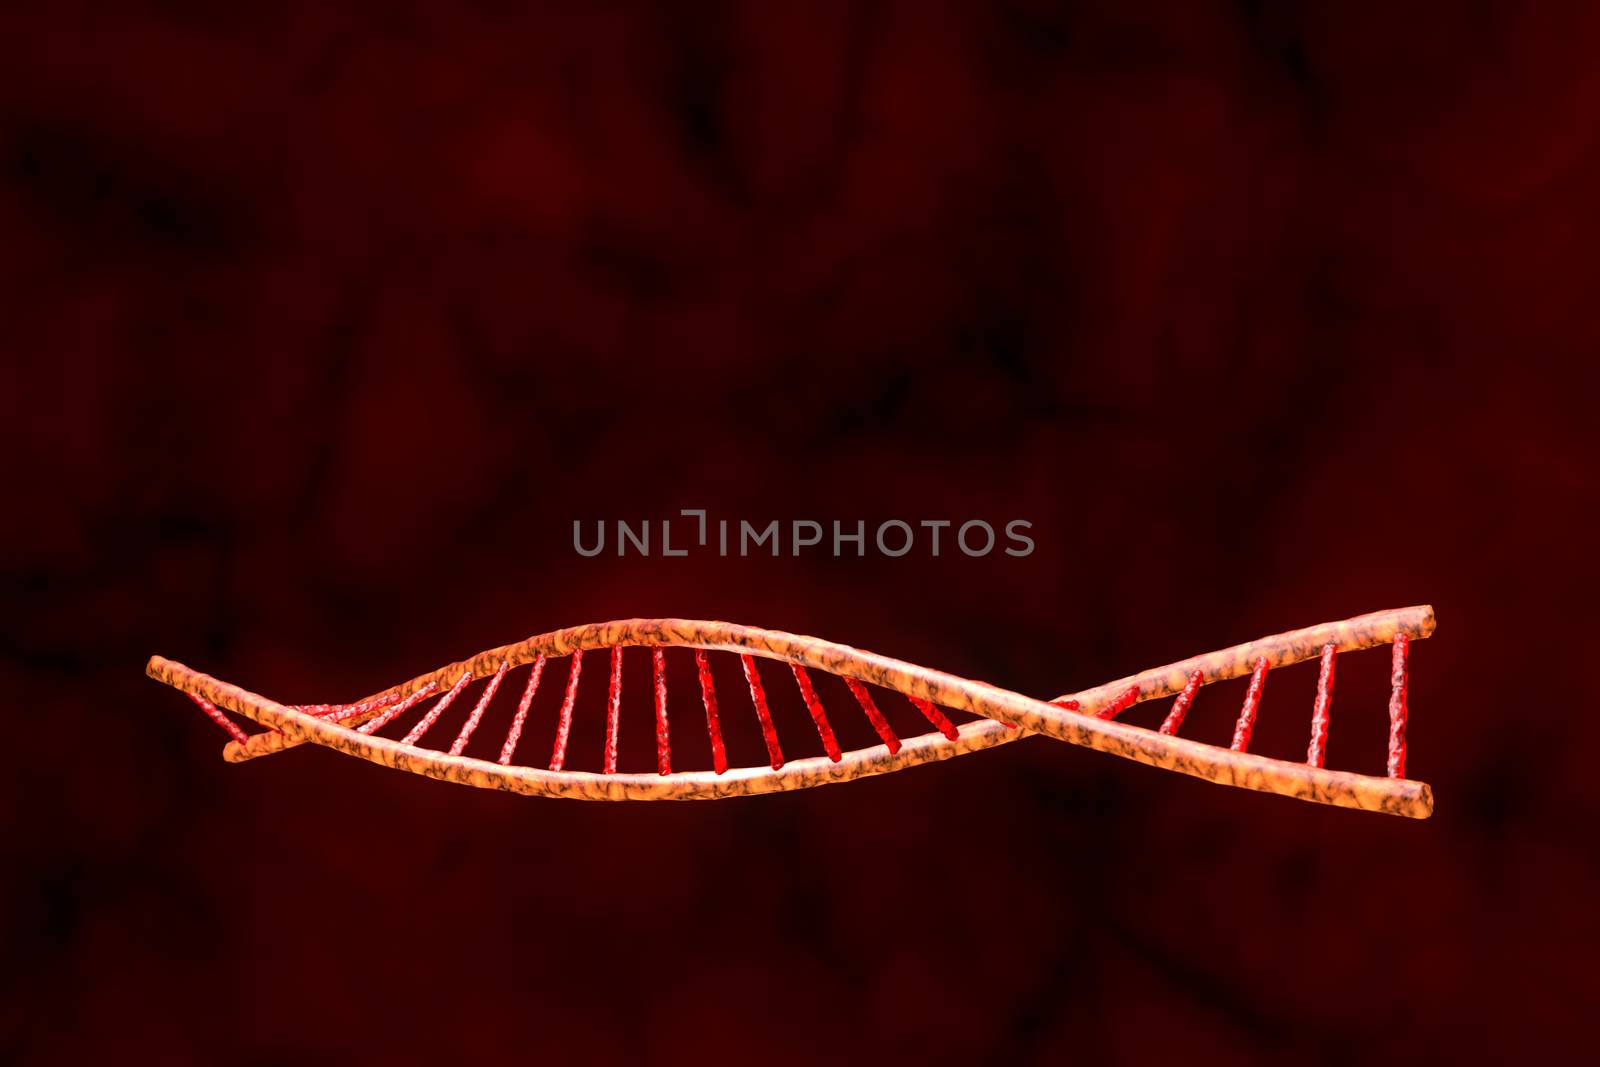 The model of human DNA (3d-model). Abstract dark red background.